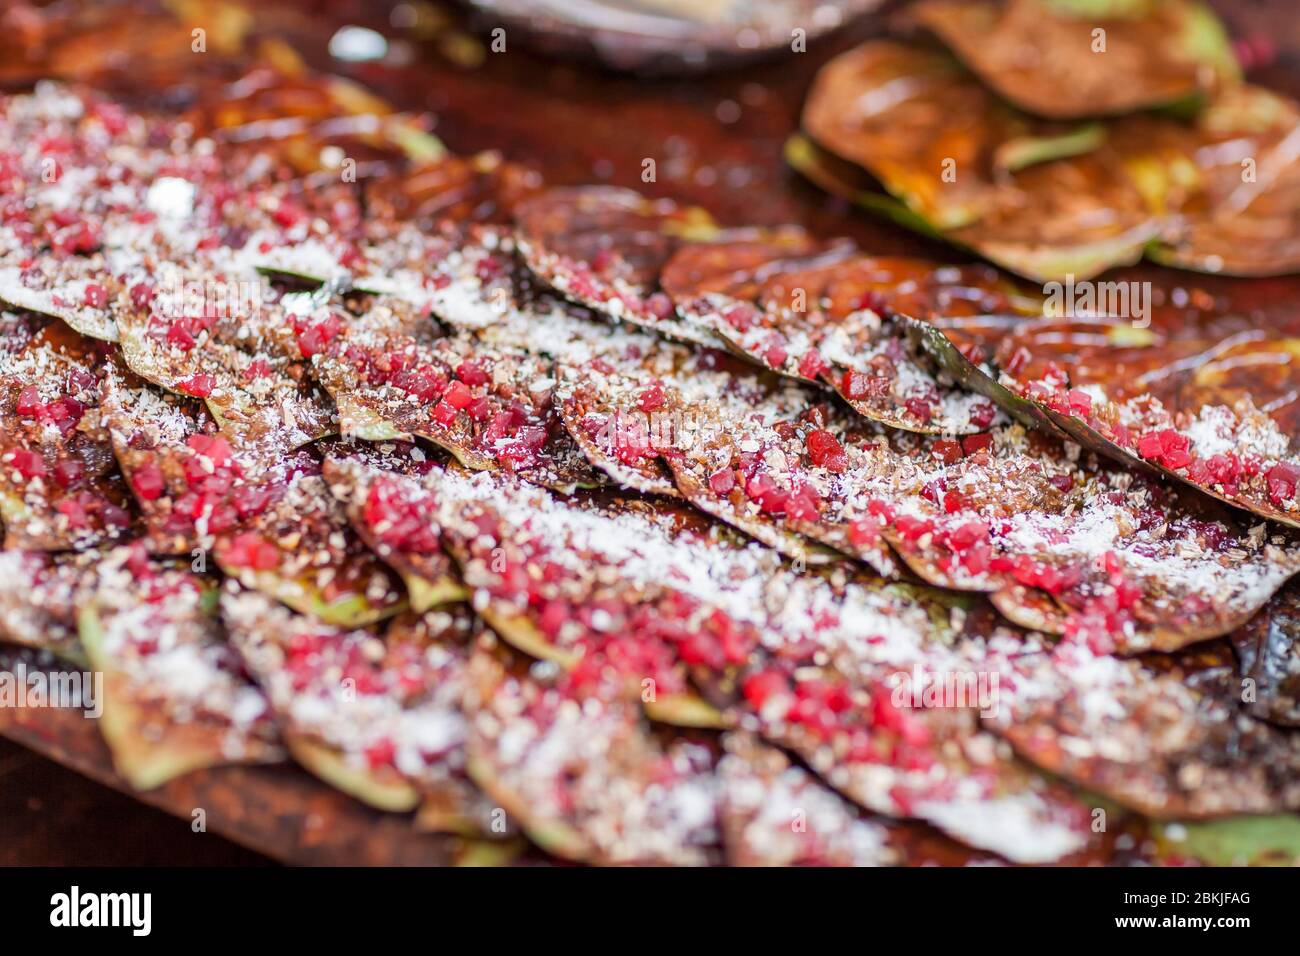 India, Rajasthan, Bundi, close-up on paan, preparation combining betel leaves with areca nut and tobacco Stock Photo